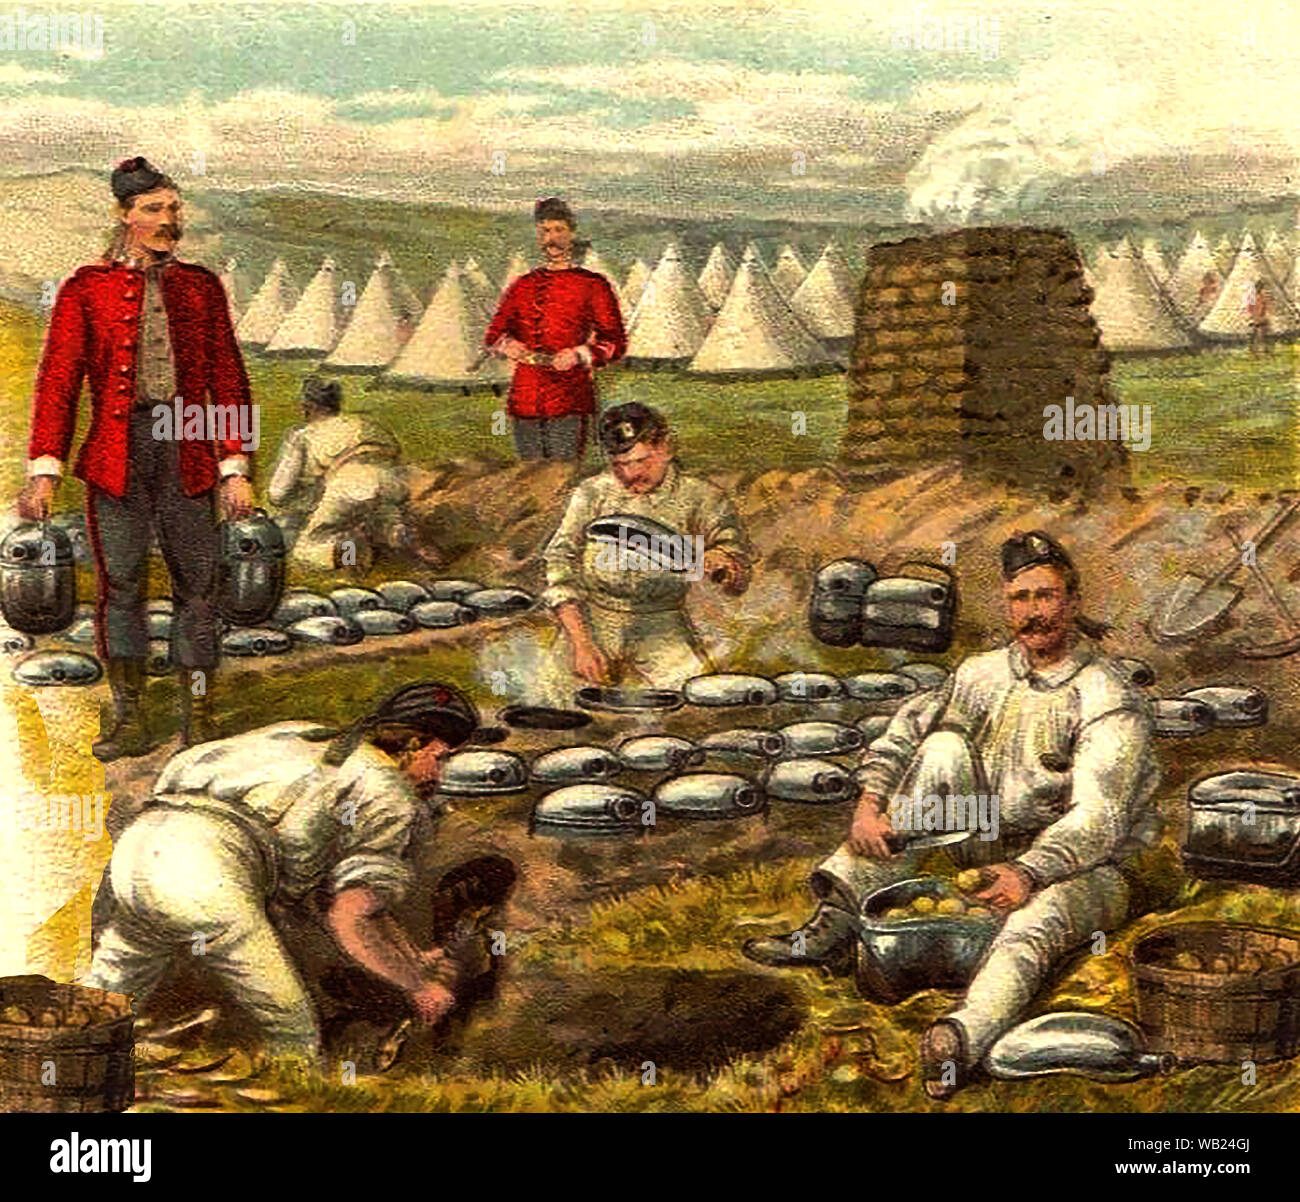 Early postcard image  (circa 1900) showing the camp kitchen of a British regiment wearing red jackets and Glengarry style caps. Tents  and a brick built camp oven can be seen in the background. Stock Photo